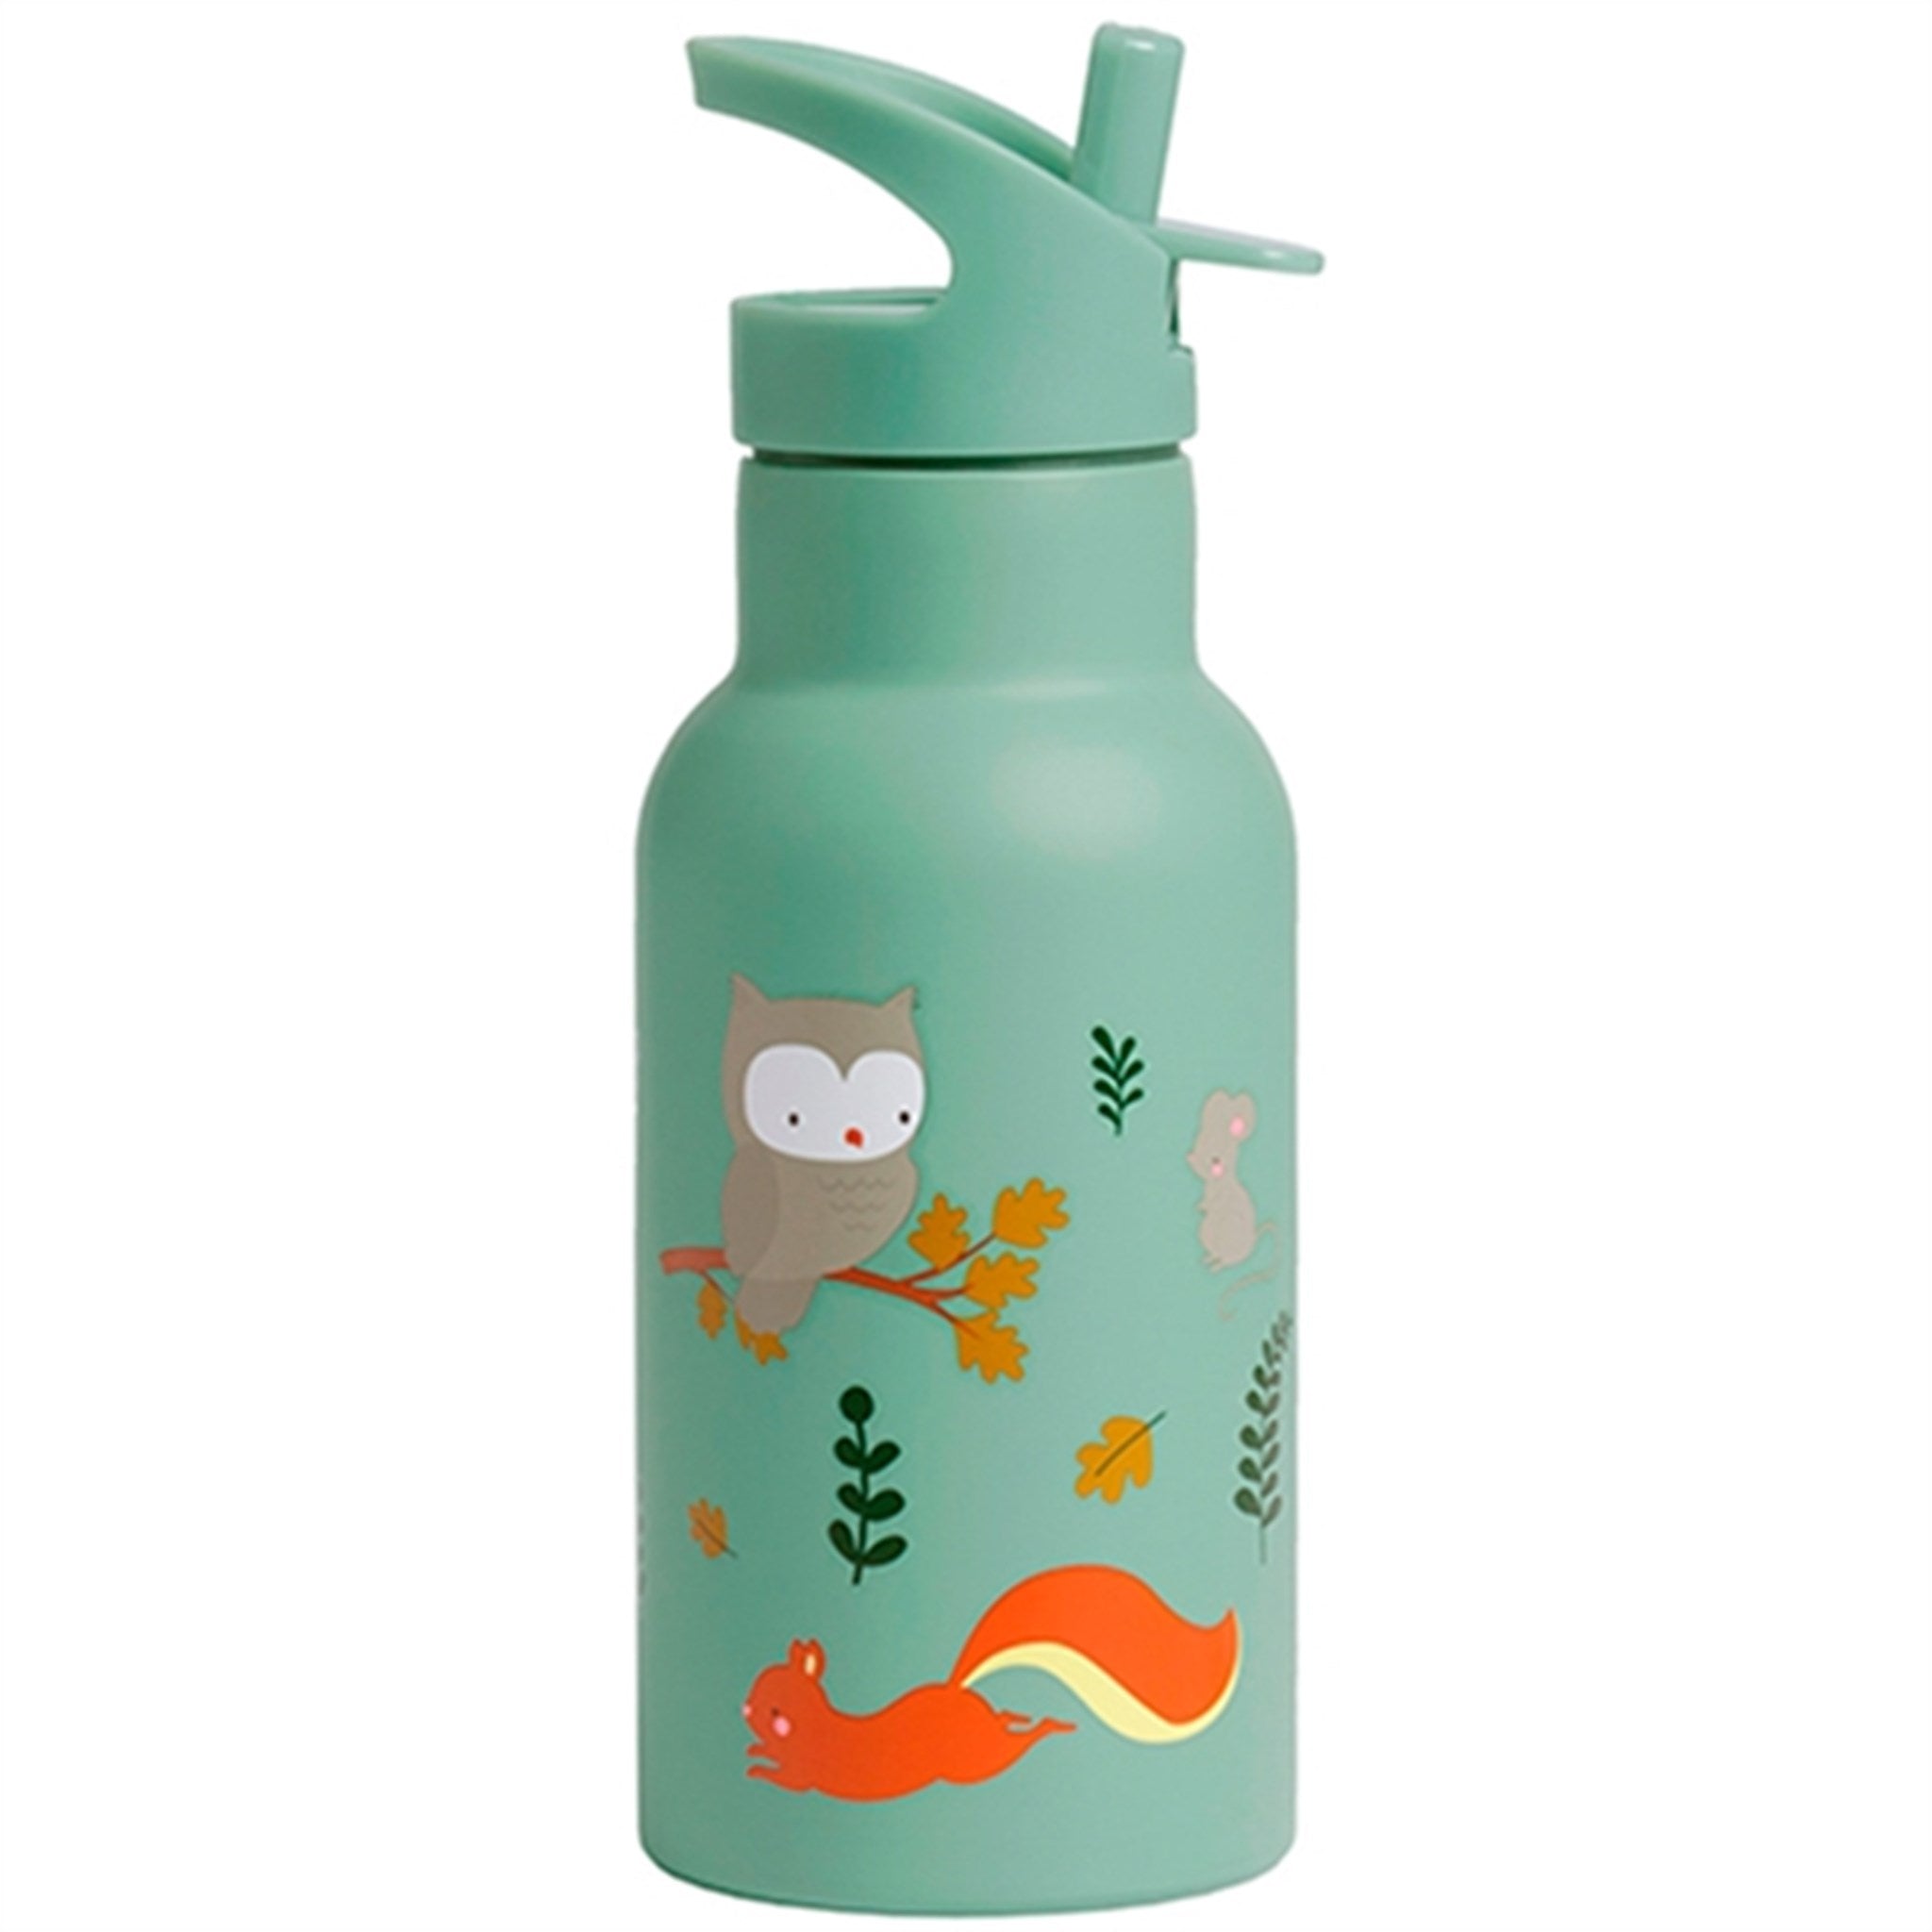 A Little Lovely Company Stainless Steel Drink Bottle Forest Friends